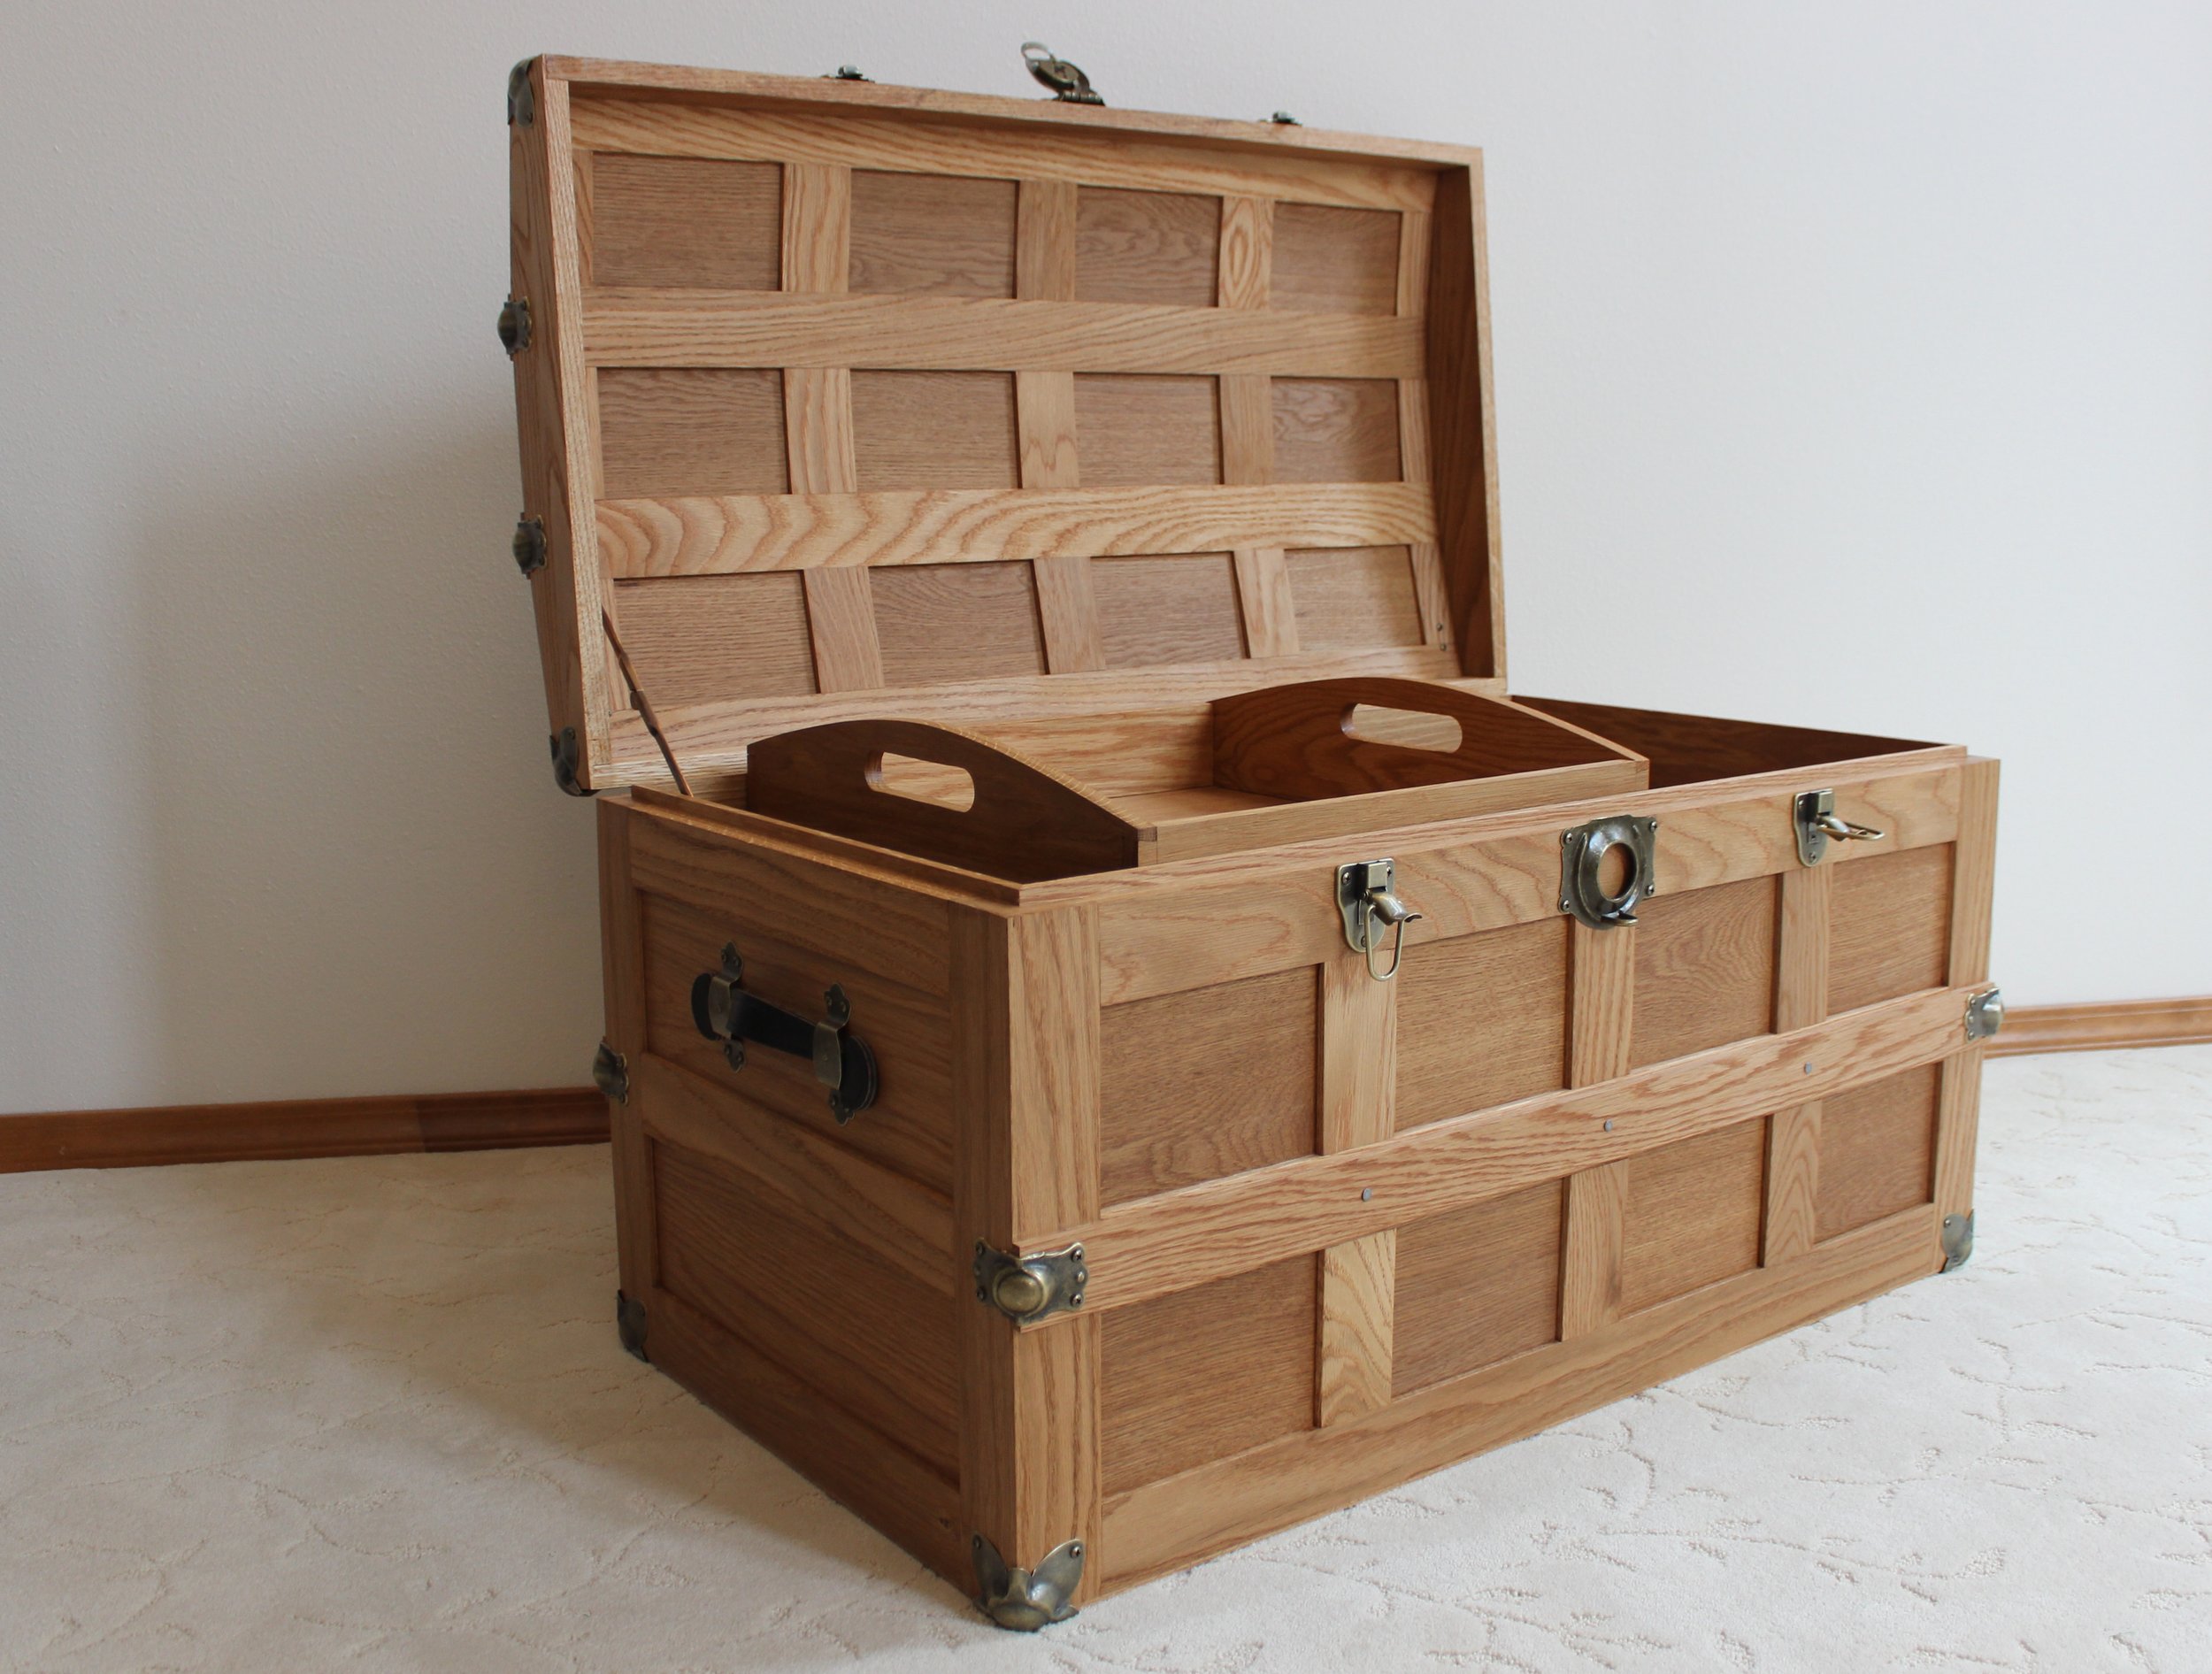 How To Make A Steamer Trunk